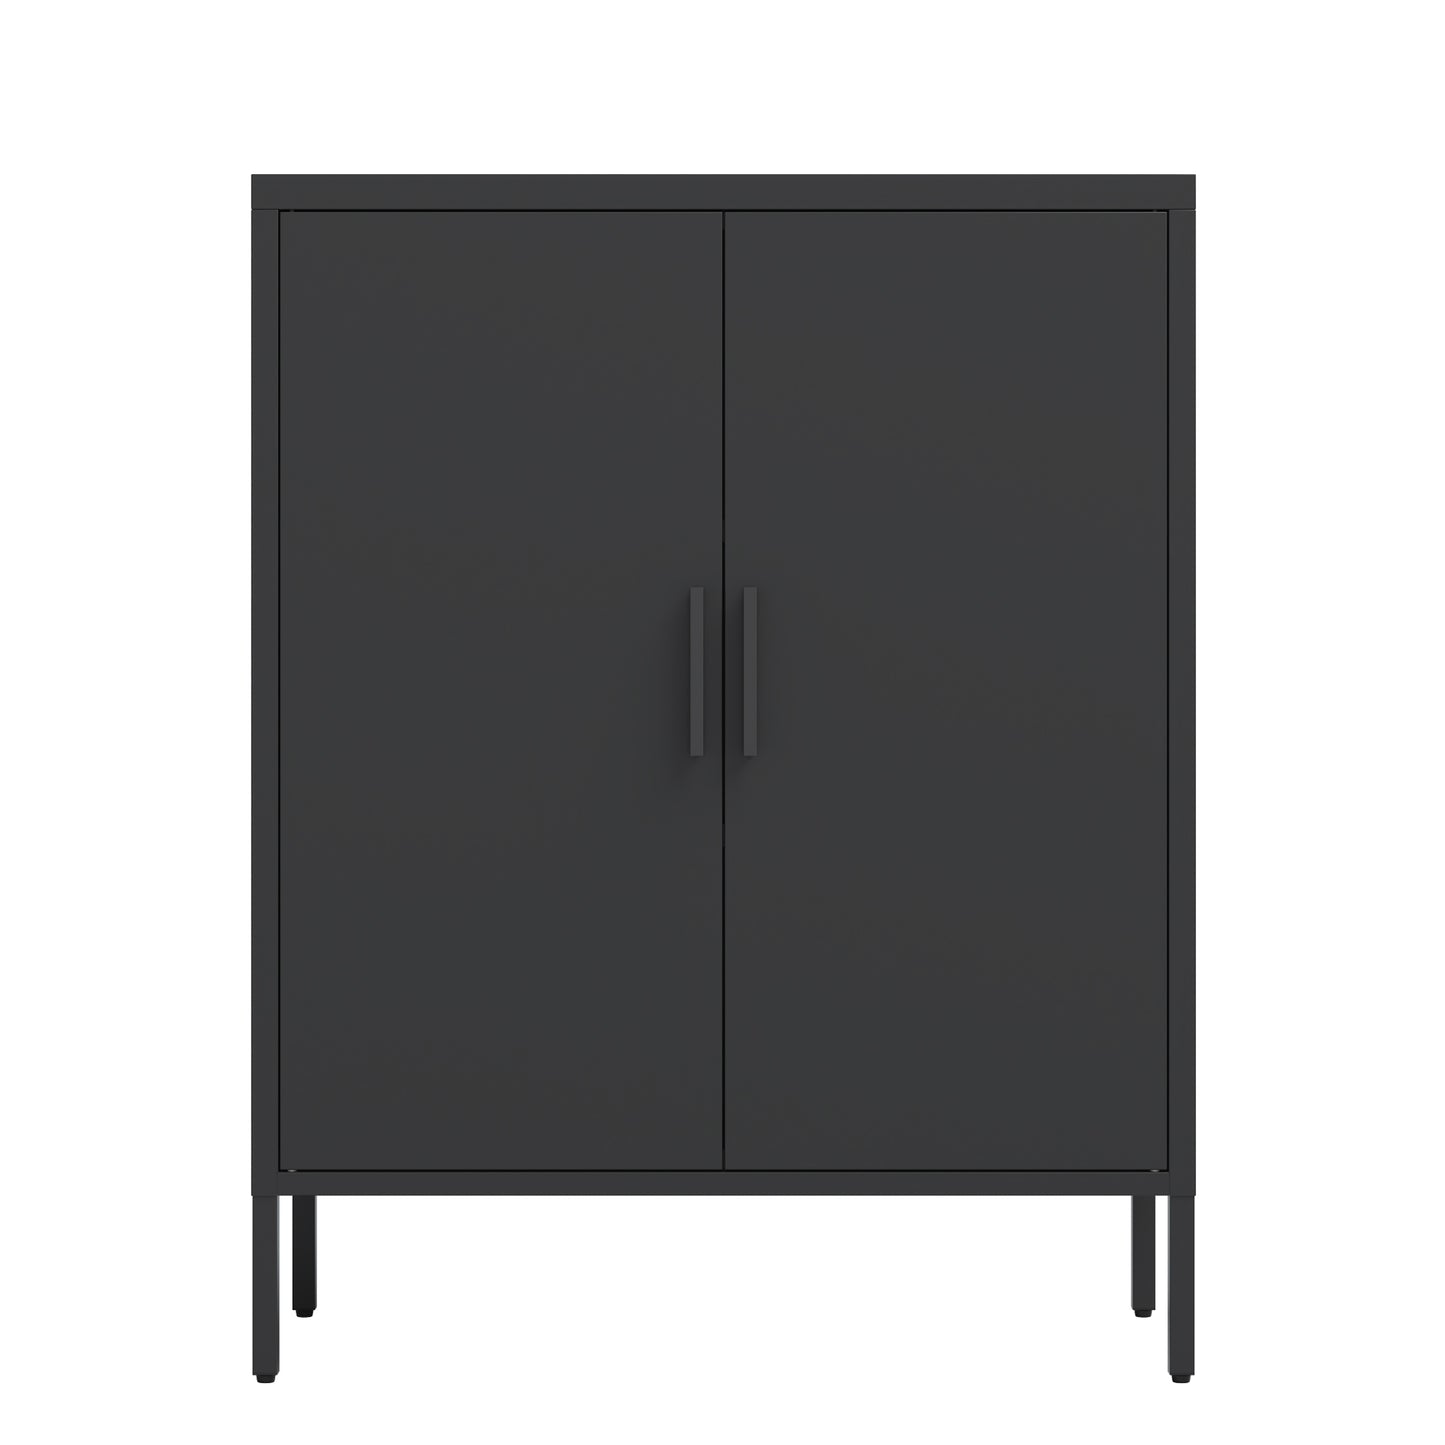 Lockable Black Metal Storage Cabinet with 2 Adjustable Shelves and Heavy-Duty Frame